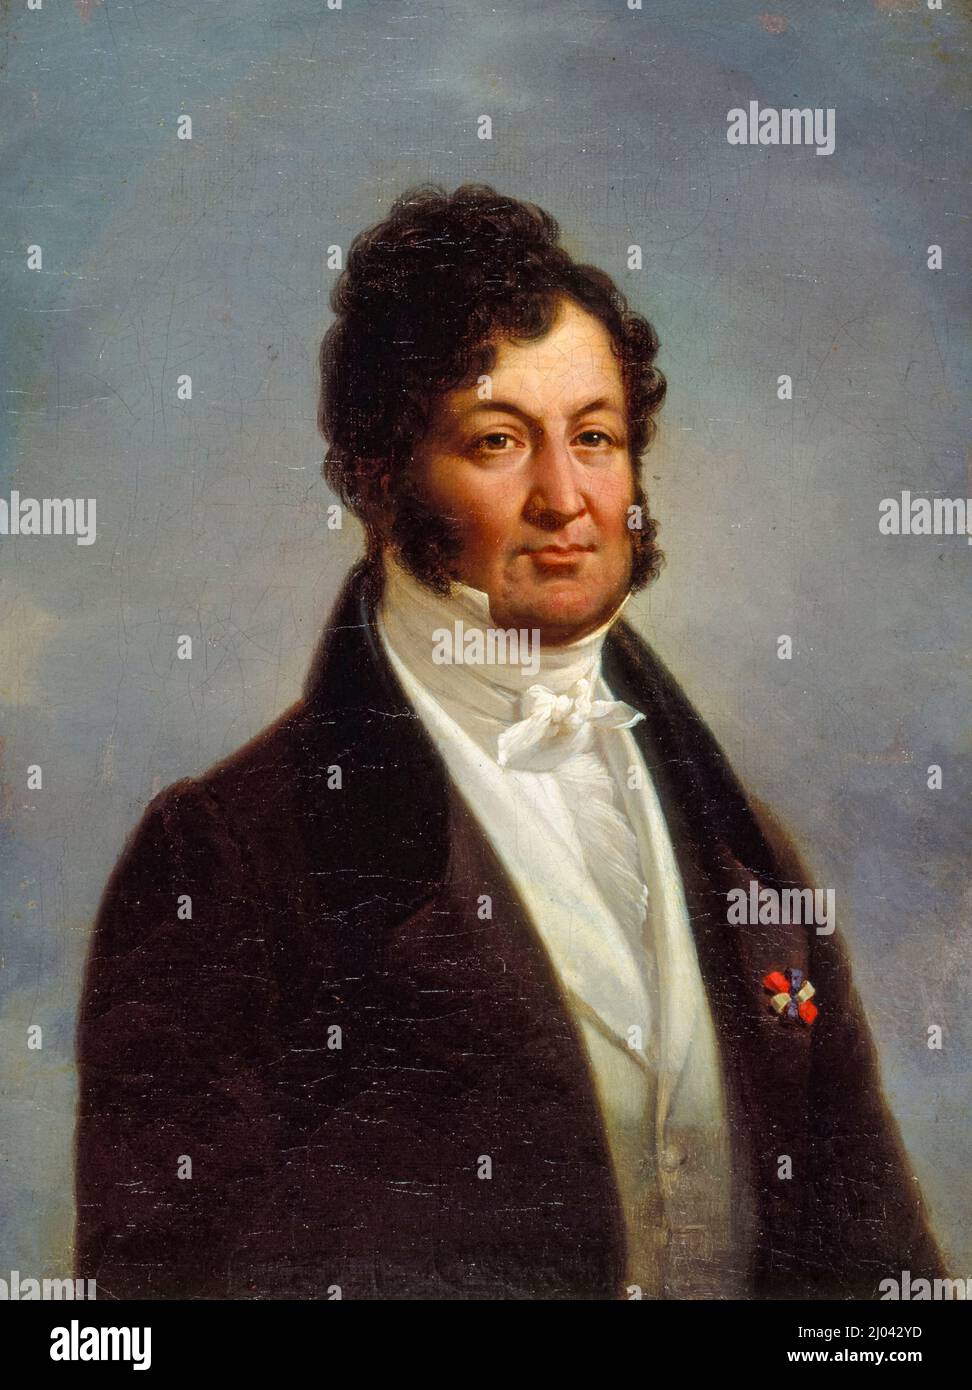 Louis Philippe I (1773-1850), King of France (1830-1848), oil on canvas portrait painting by Pierre Roch Vigneron, 1831 Stock Photo